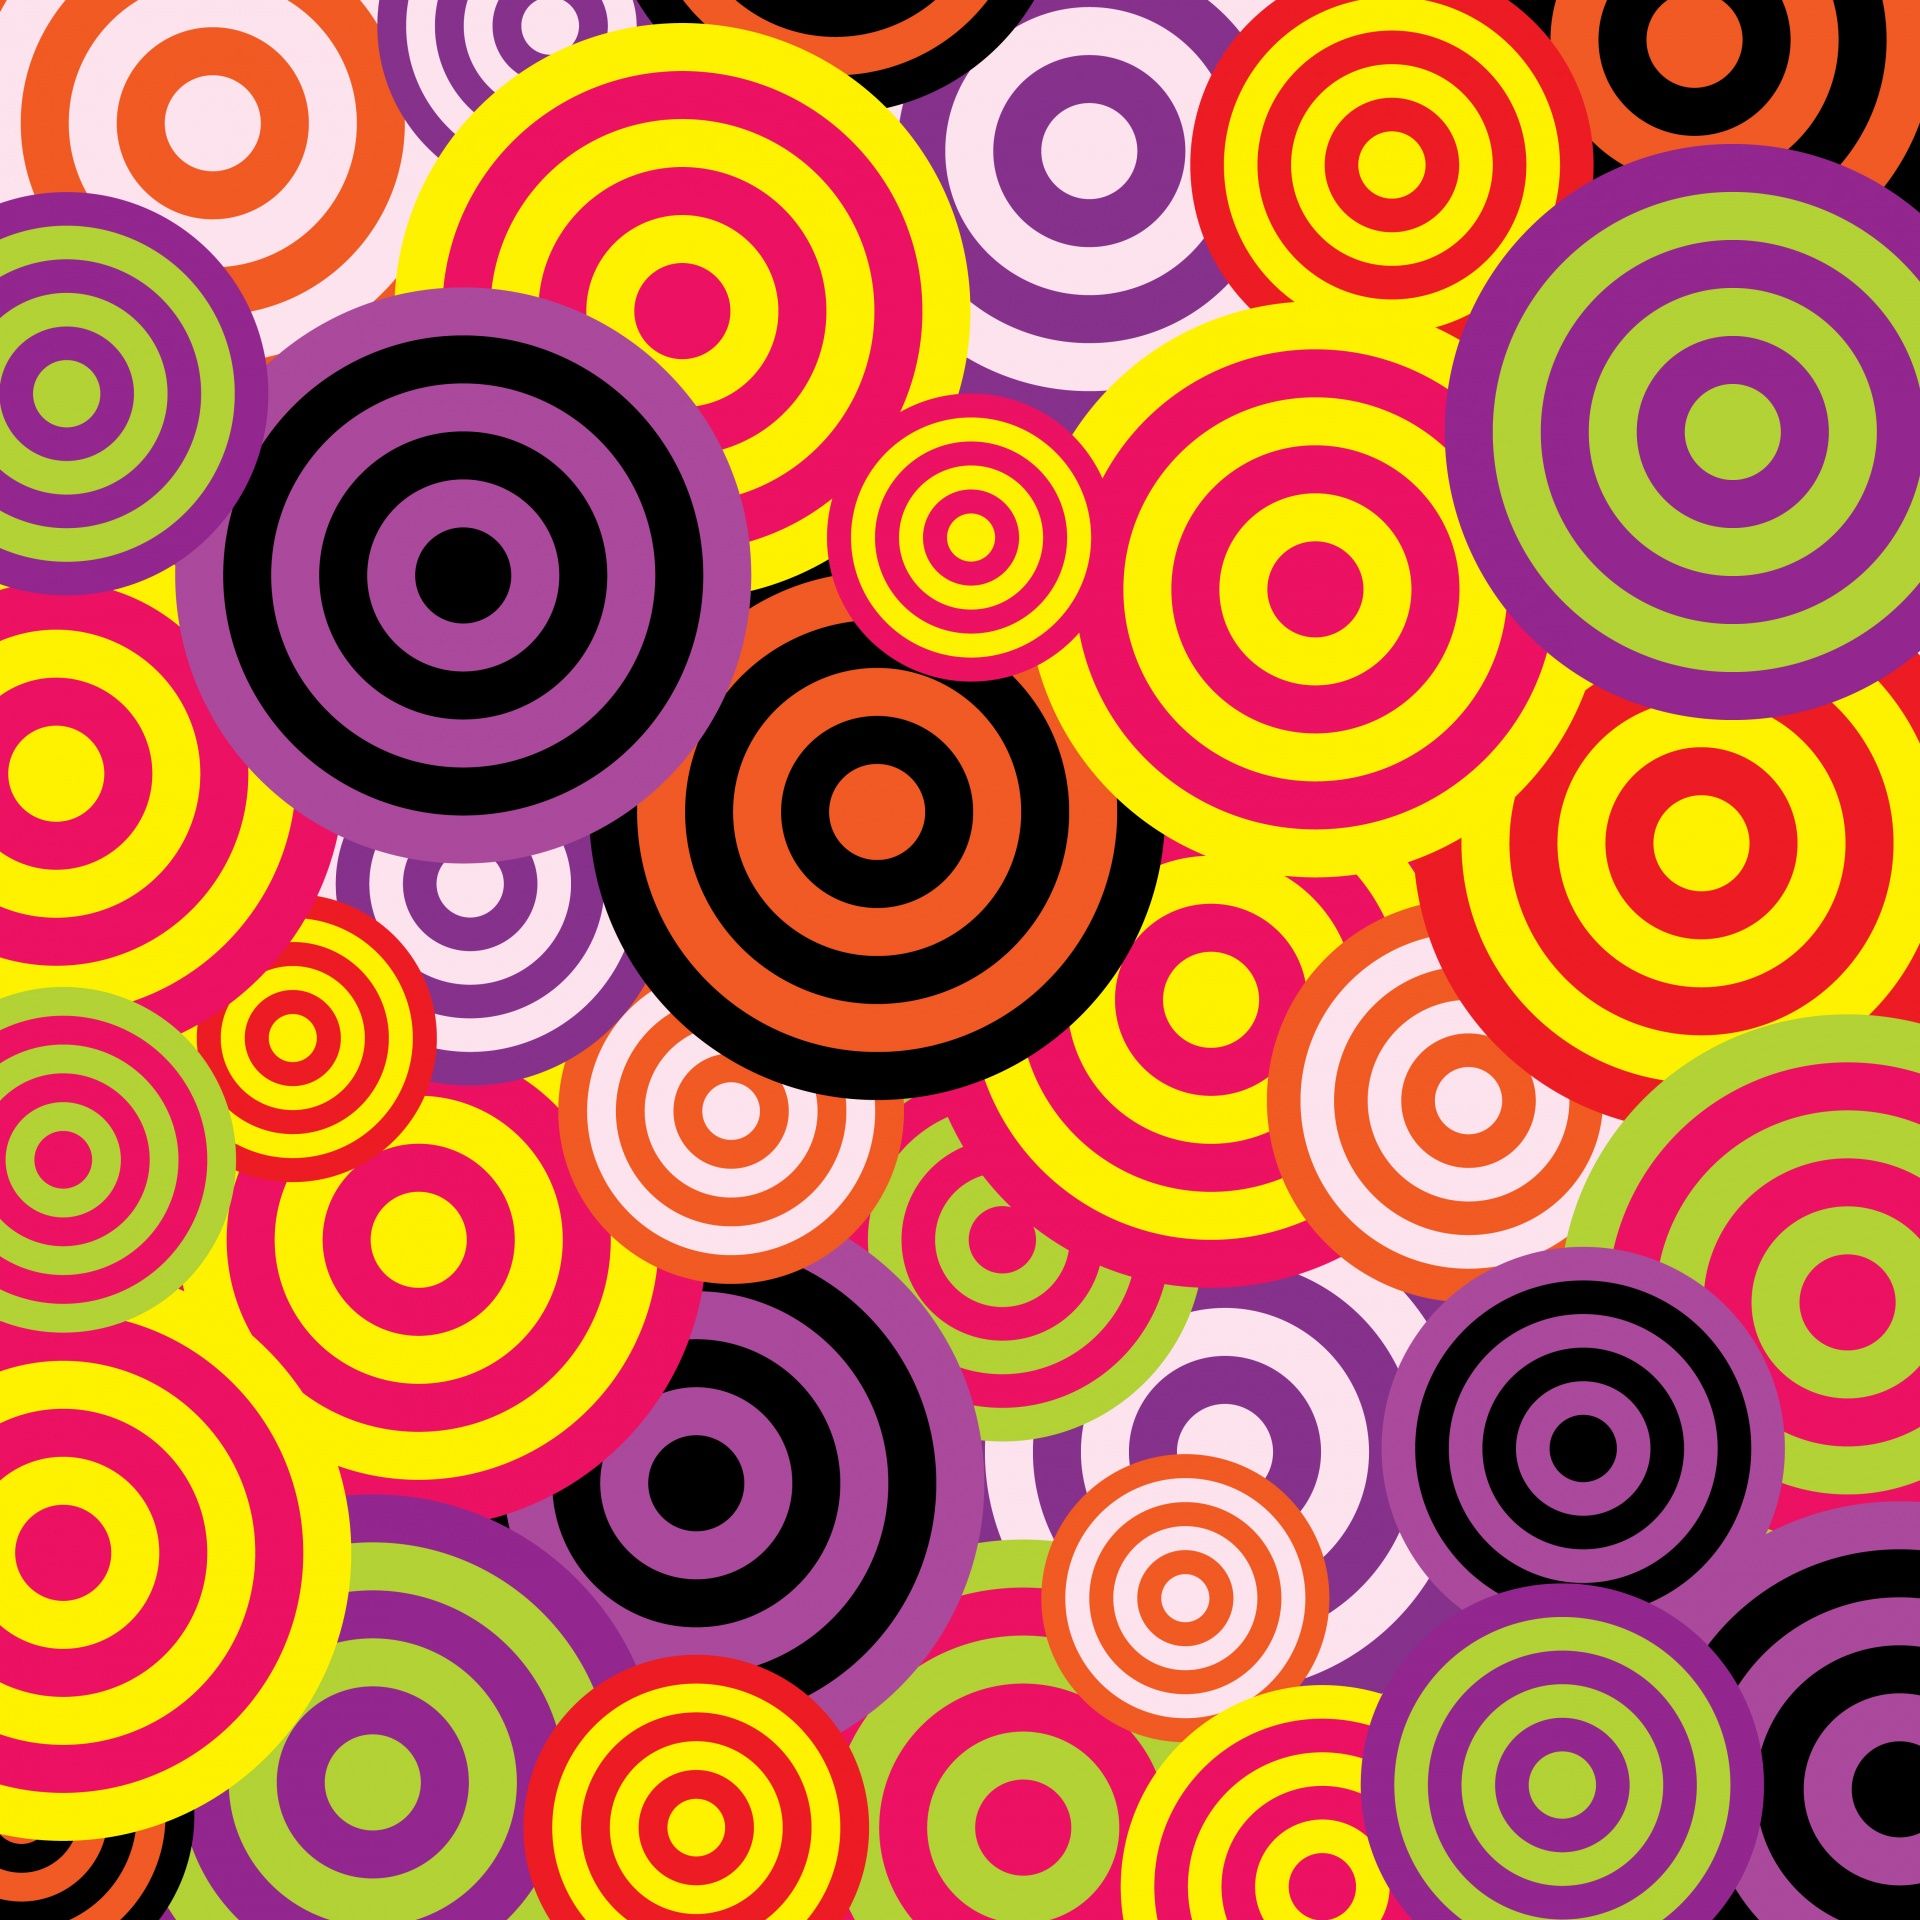 A colorful pattern of concentric circles in shades of pink, purple, yellow, and green. - 60s